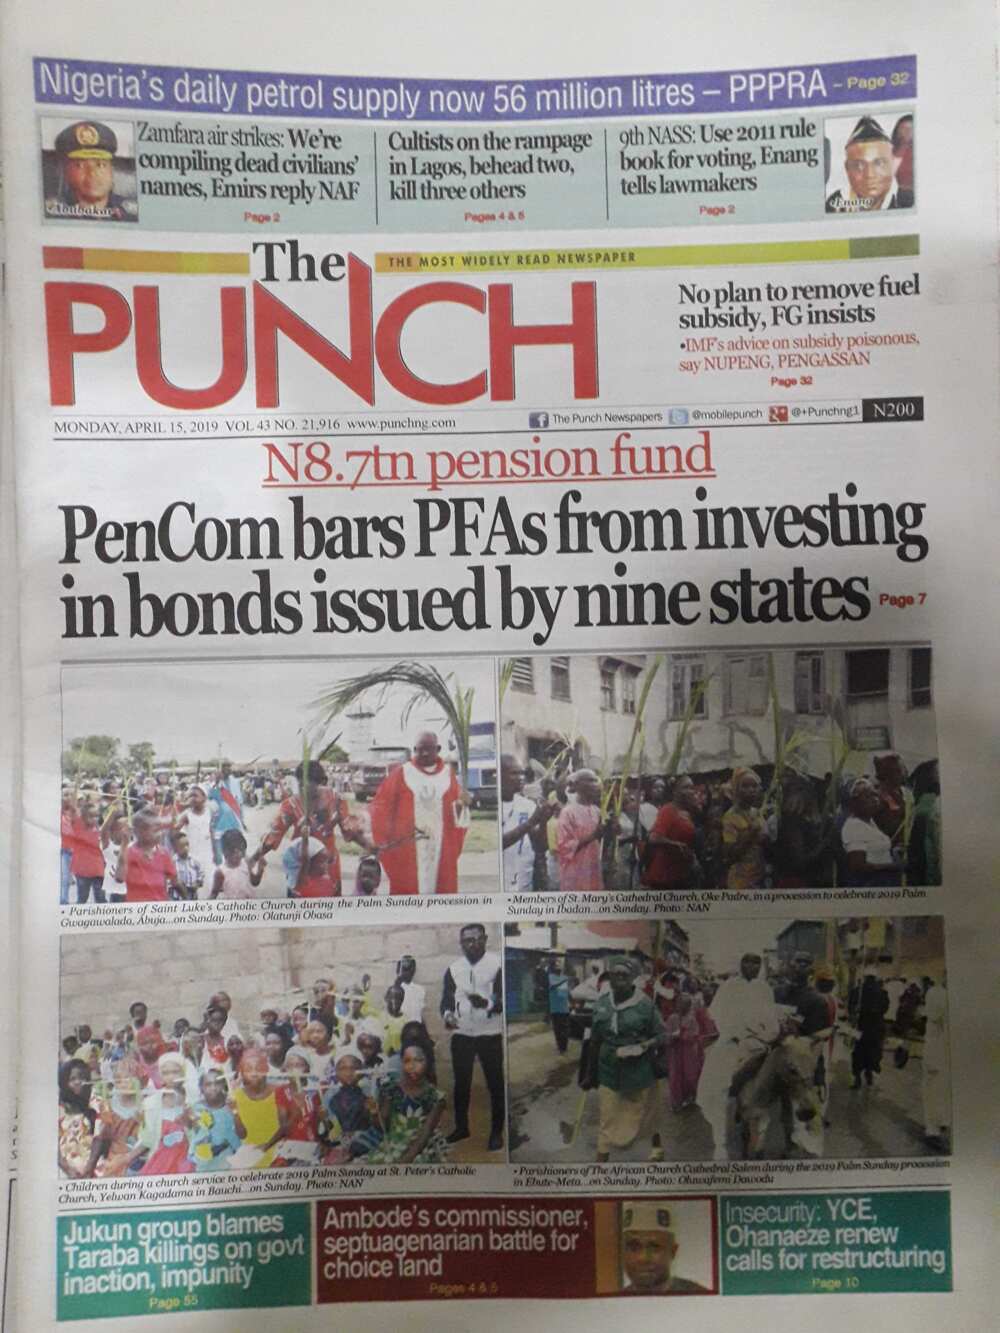 Nigerian newspaper review for April 15: APC clears Lawan, others to consult PDP colleagues